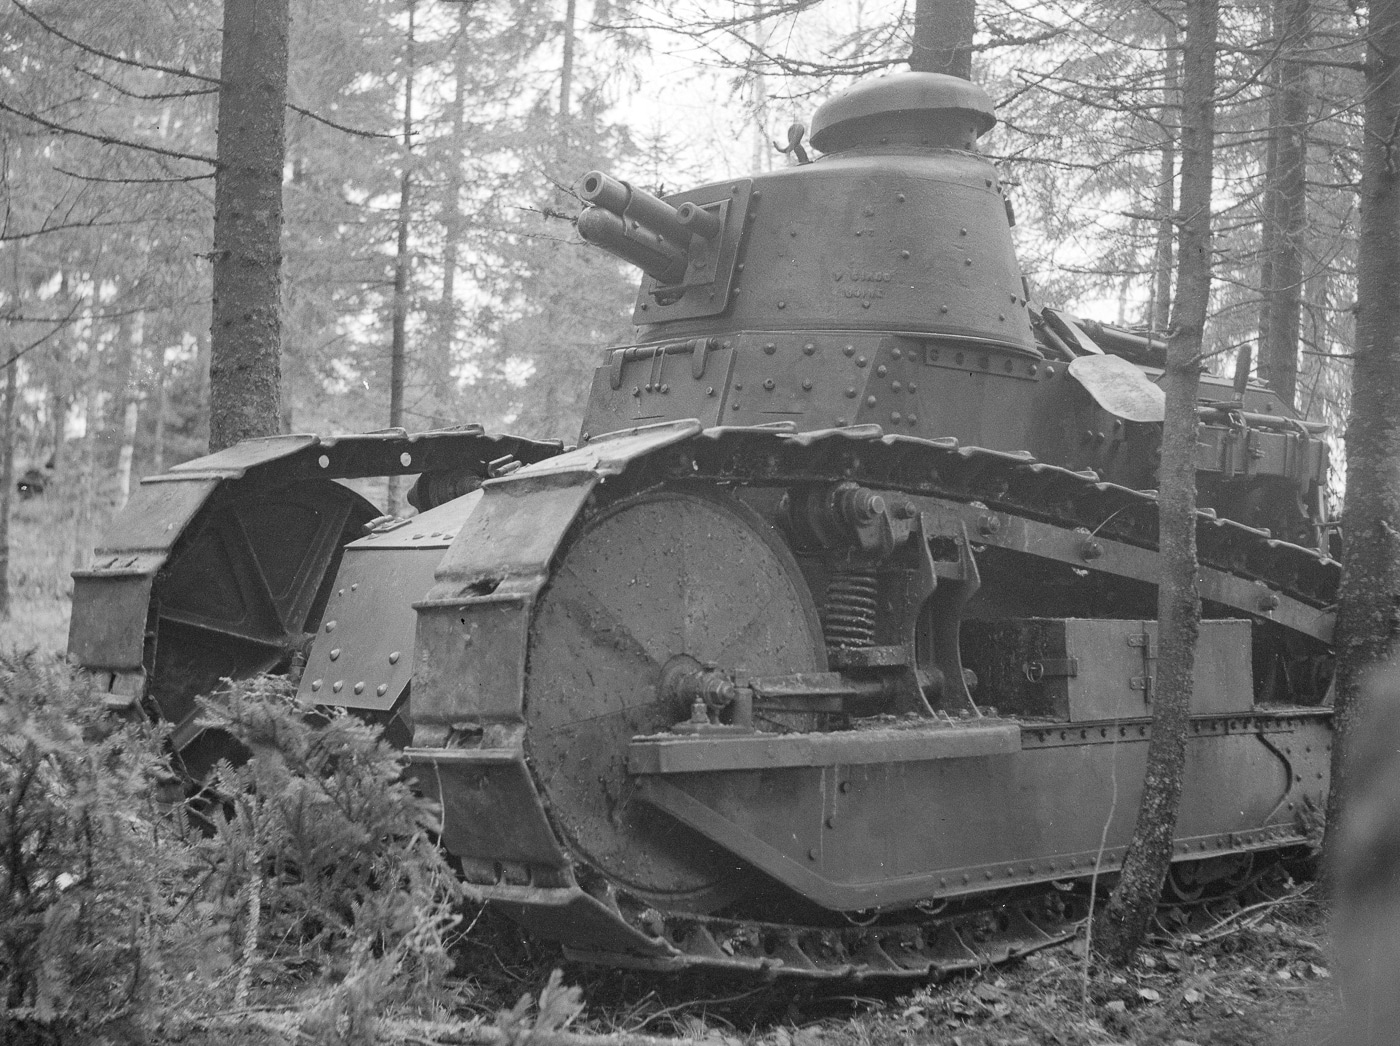 Finnish Renault tank in the Continuation War